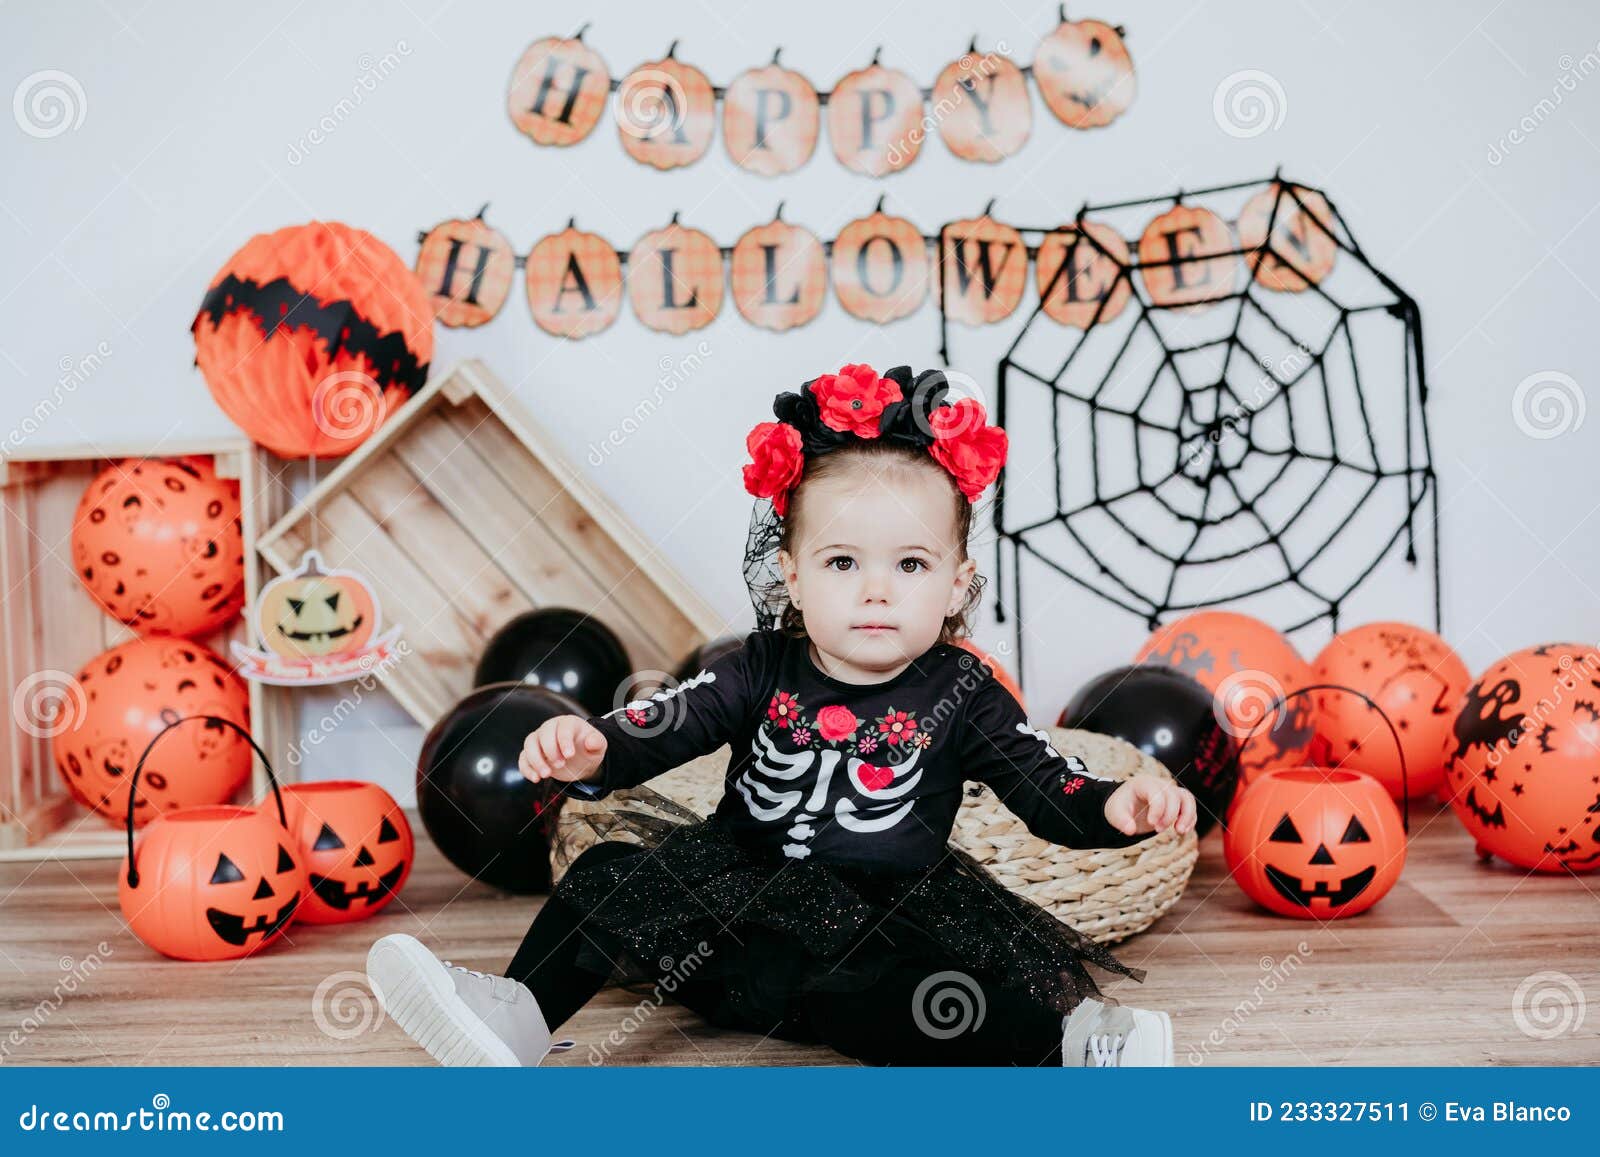 Beautiful One Year Old Caucasian Girl in Halloween Costume at Home ...